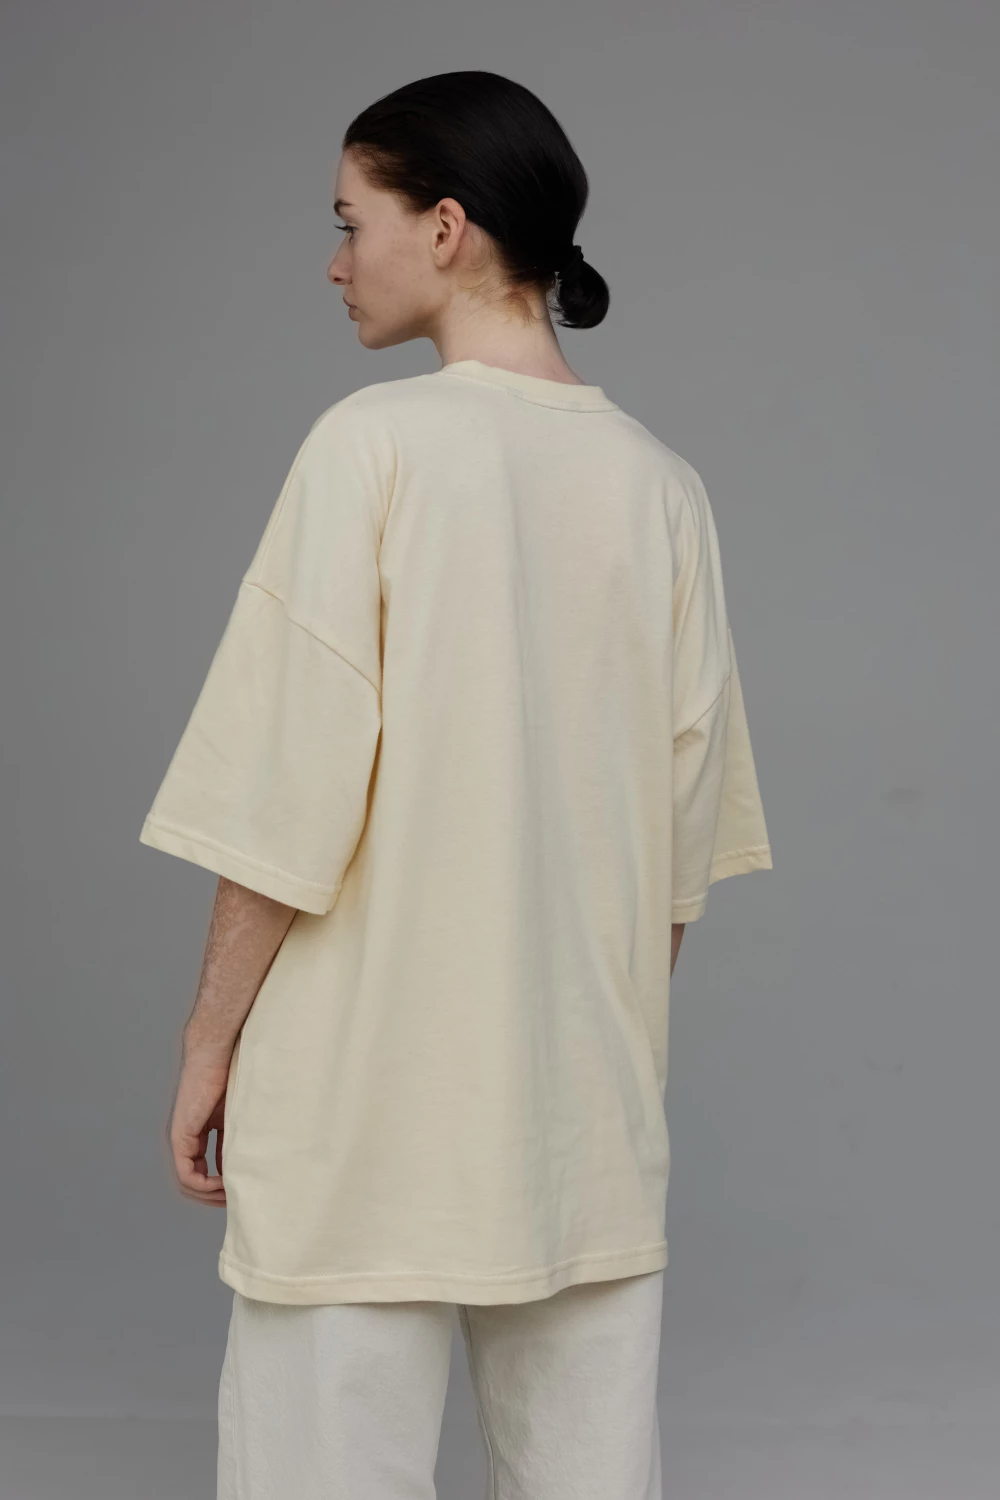 t-shirt "above pose" in vanilla color